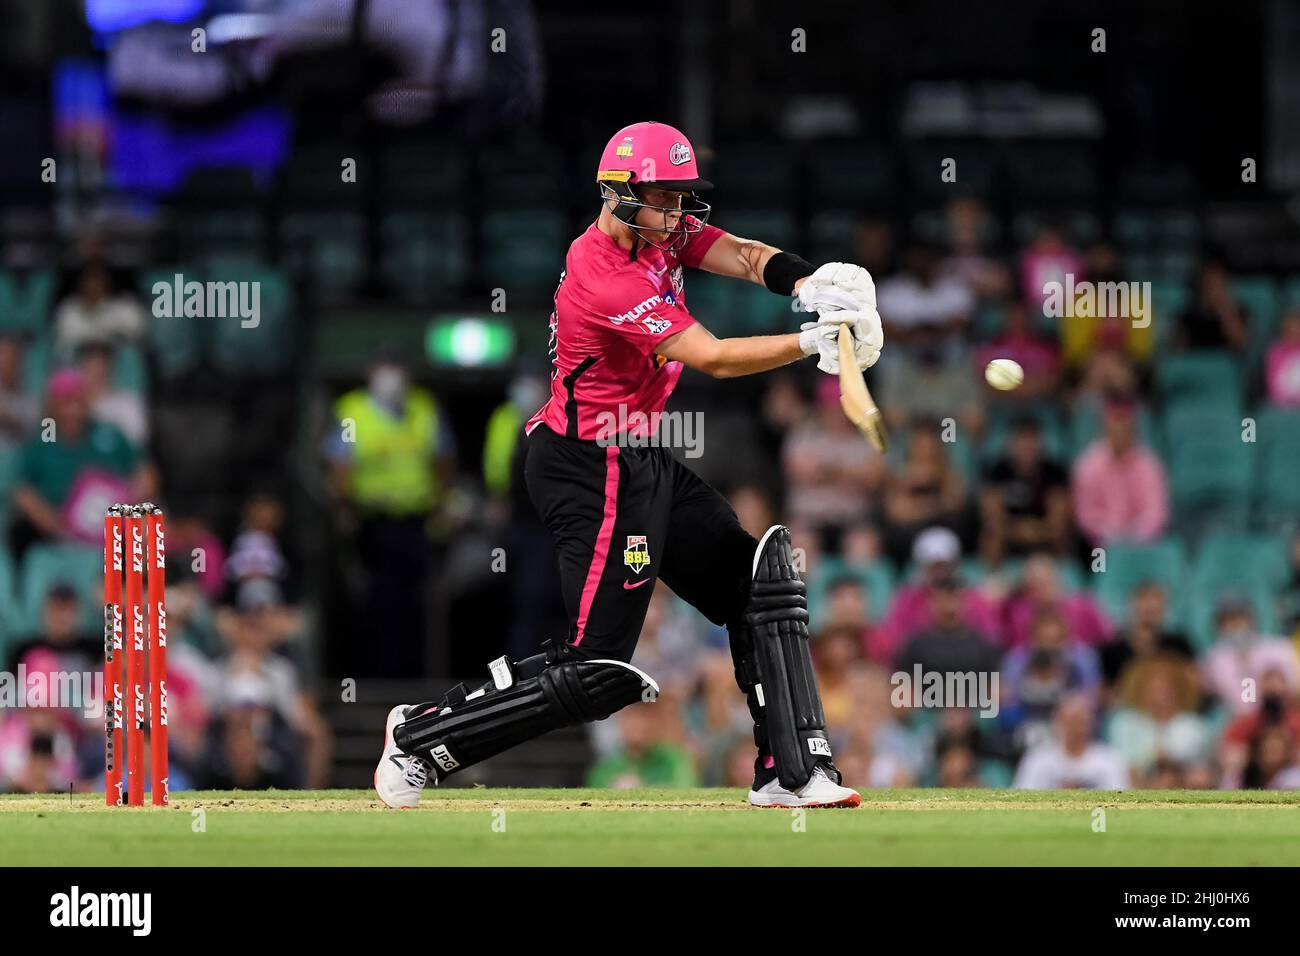 Sydney, Australia, 26 January, 2022. Sean Abbott of the Sixers hits the ball during the Big Bash League Challenger cricket match between Sydney Sixers and Adelaide Strikers at The Sydney Cricket Ground on January 26, 2022 in Sydney, Australia. Credit: Steven Markham/Speed Media/Alamy Live News Stock Photo